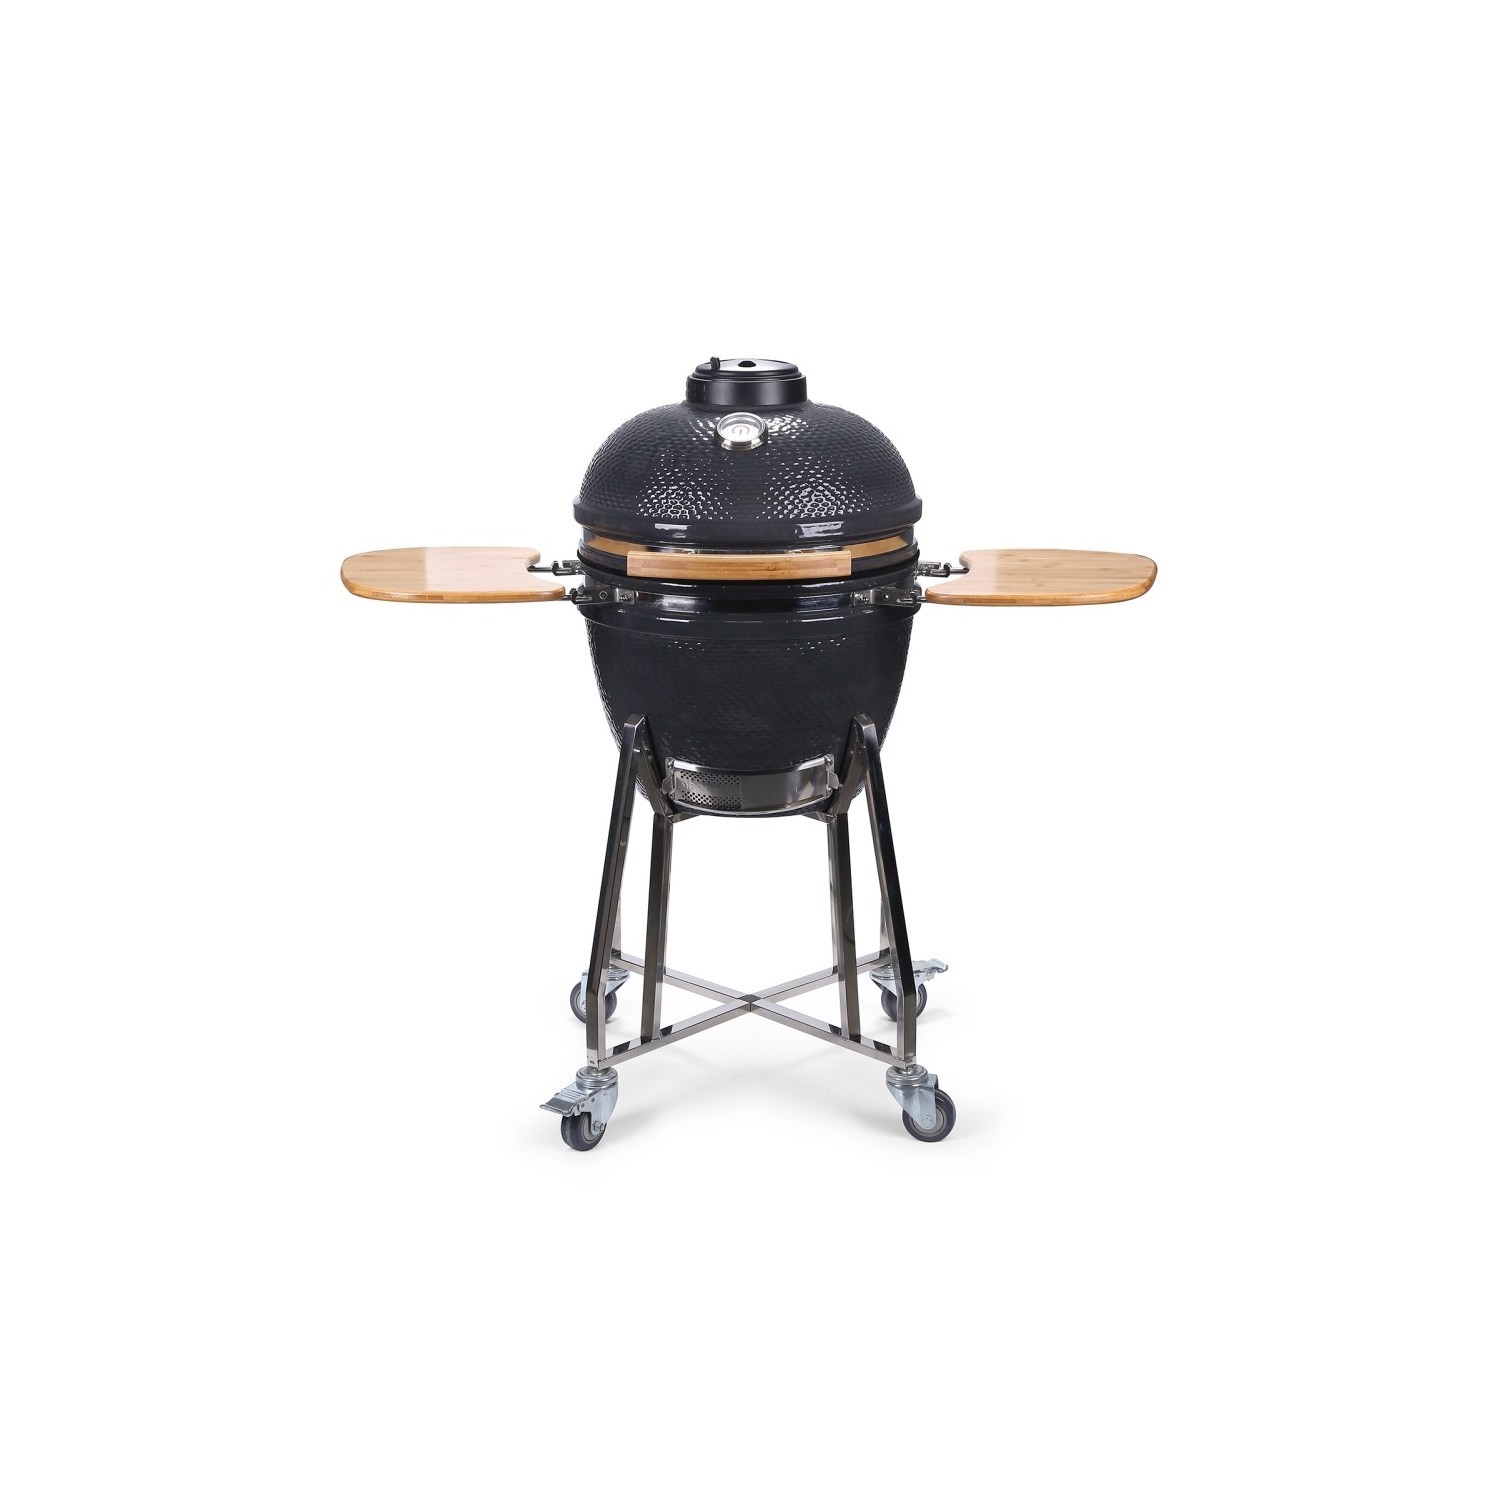 Boss Grill The Egg - 18 Inch Ceramic Kamado Style Charcoal Egg BBQ Grill - Grey